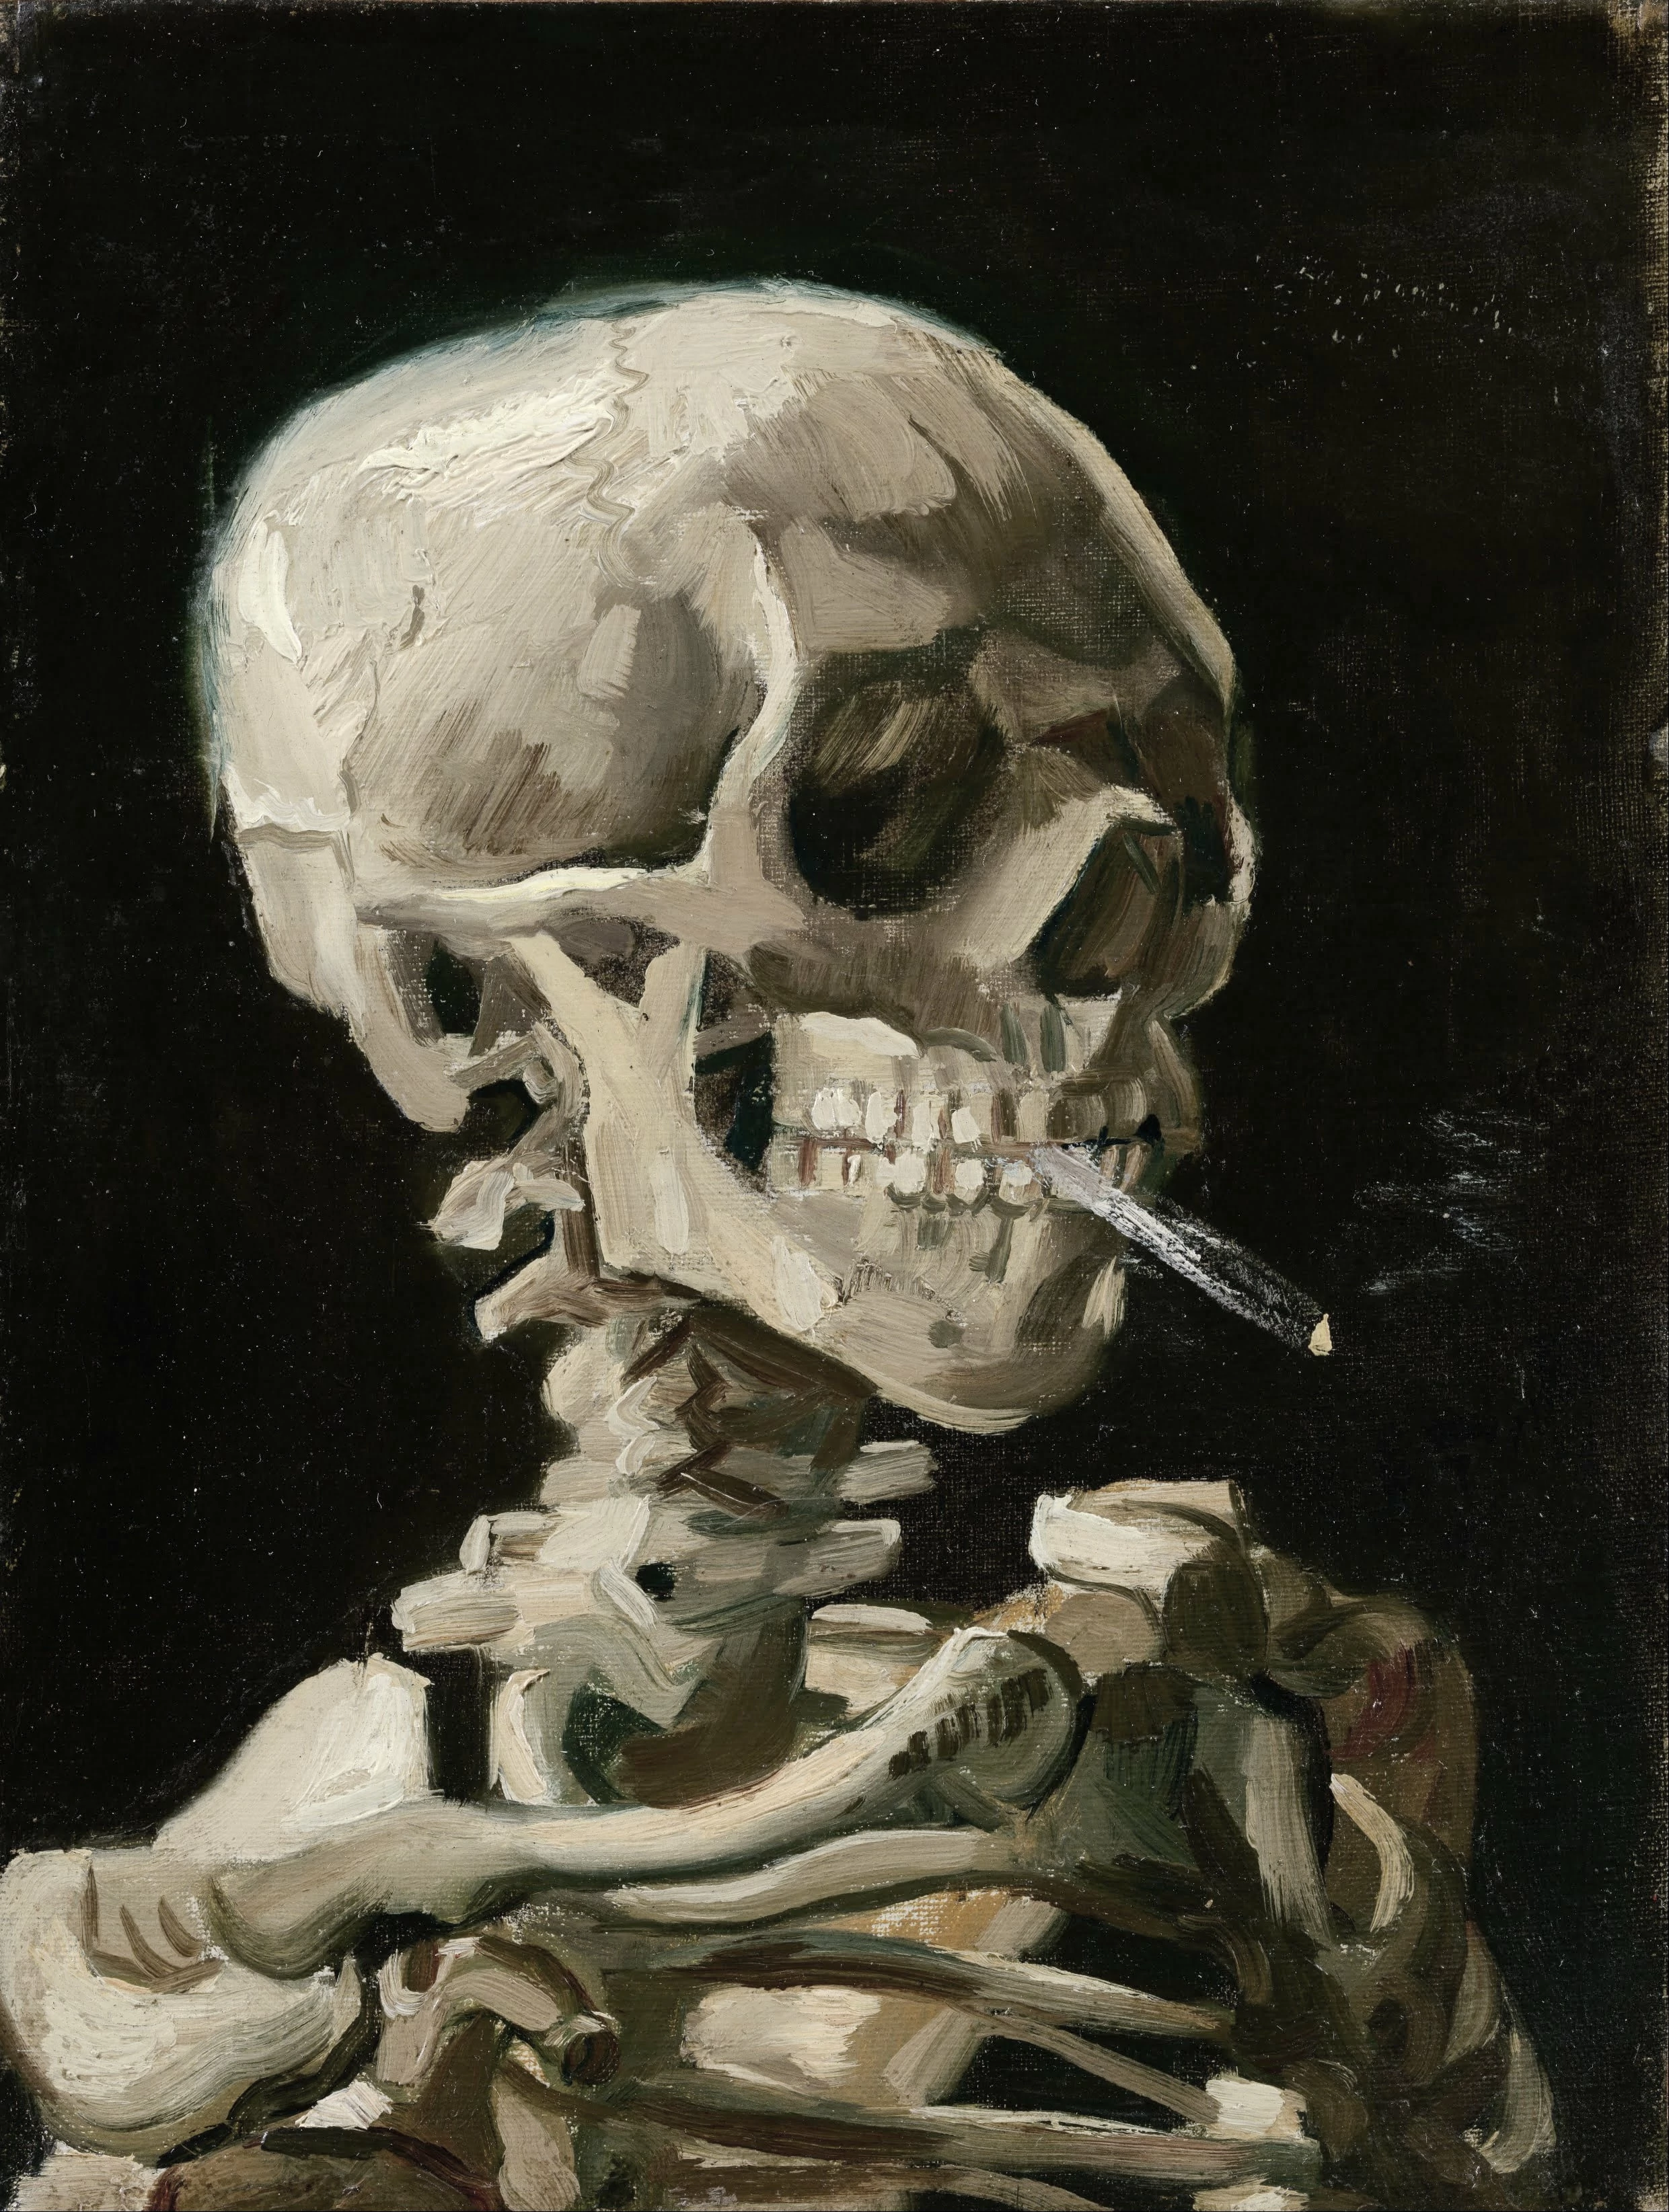 Head of a Skeleton with a Burning Cigarette, Vincent Van Gogh